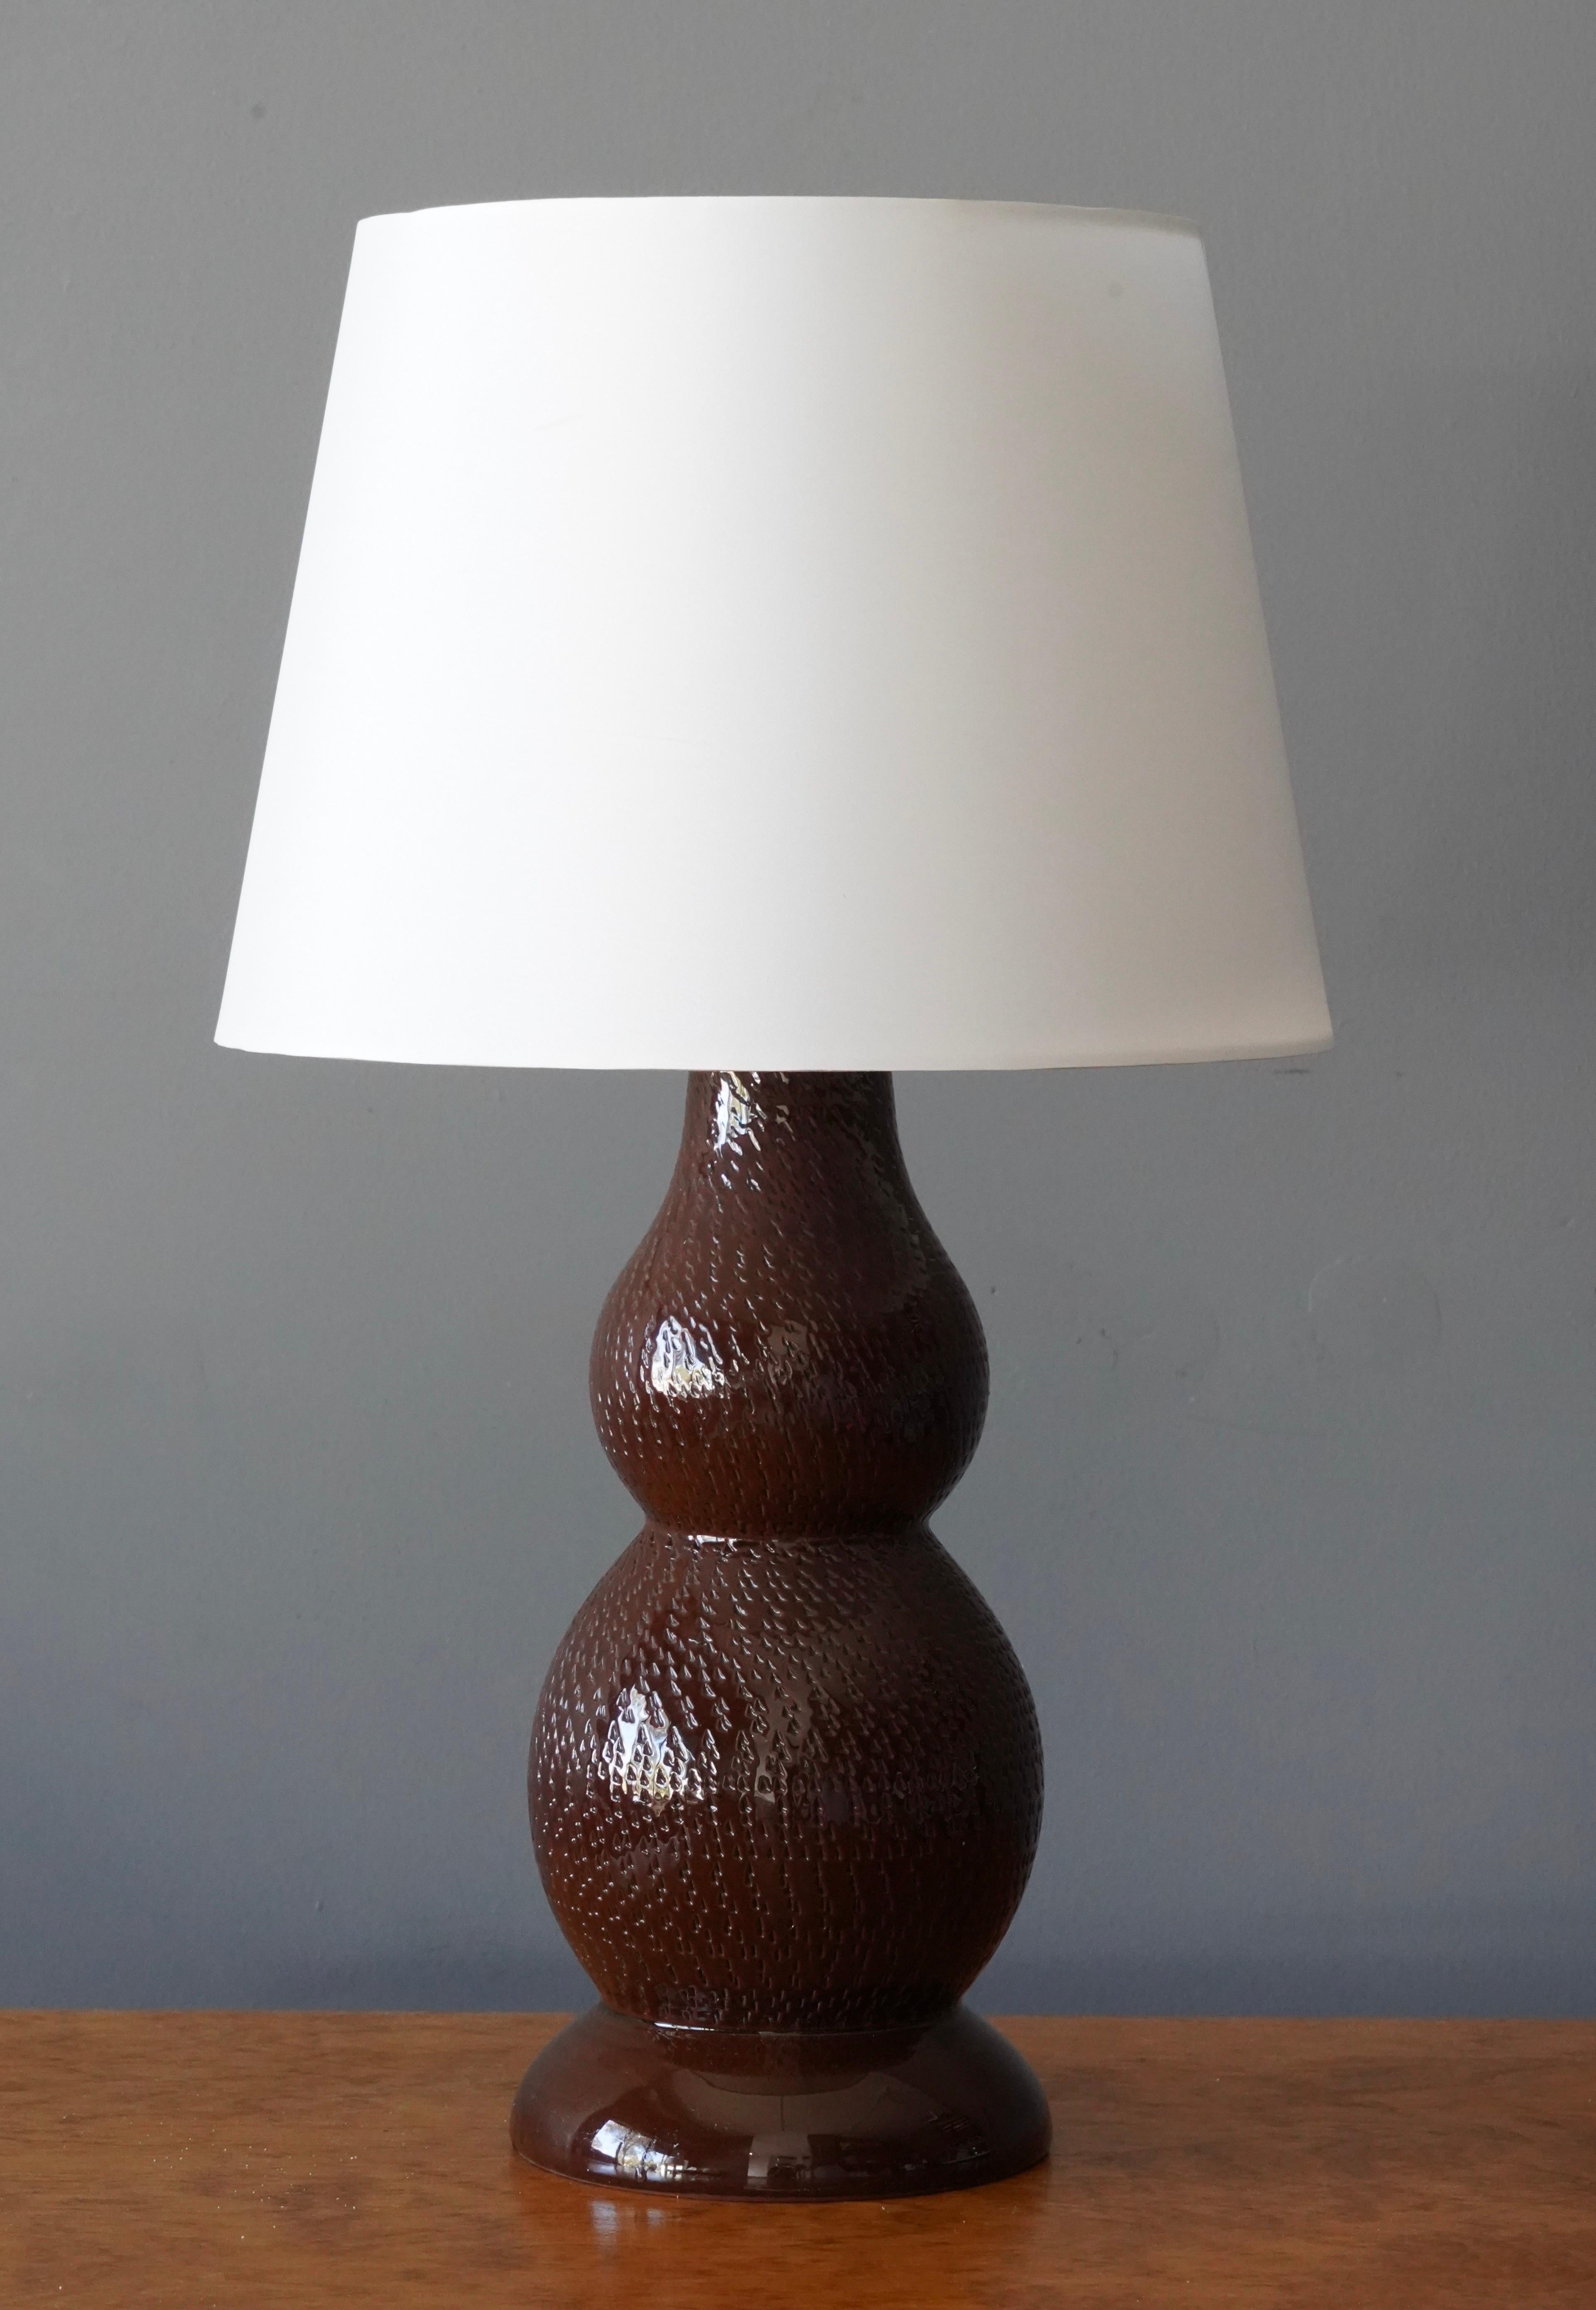 A table lamp. Designed by Mats Birgersson, produced by his own studio, Töreboda. Produced 1960s. Stamped to underside.

In brown glazed stoneware. With simple incised ornamentation.

Stated dimensions exclude lampshade. Height includes socket.